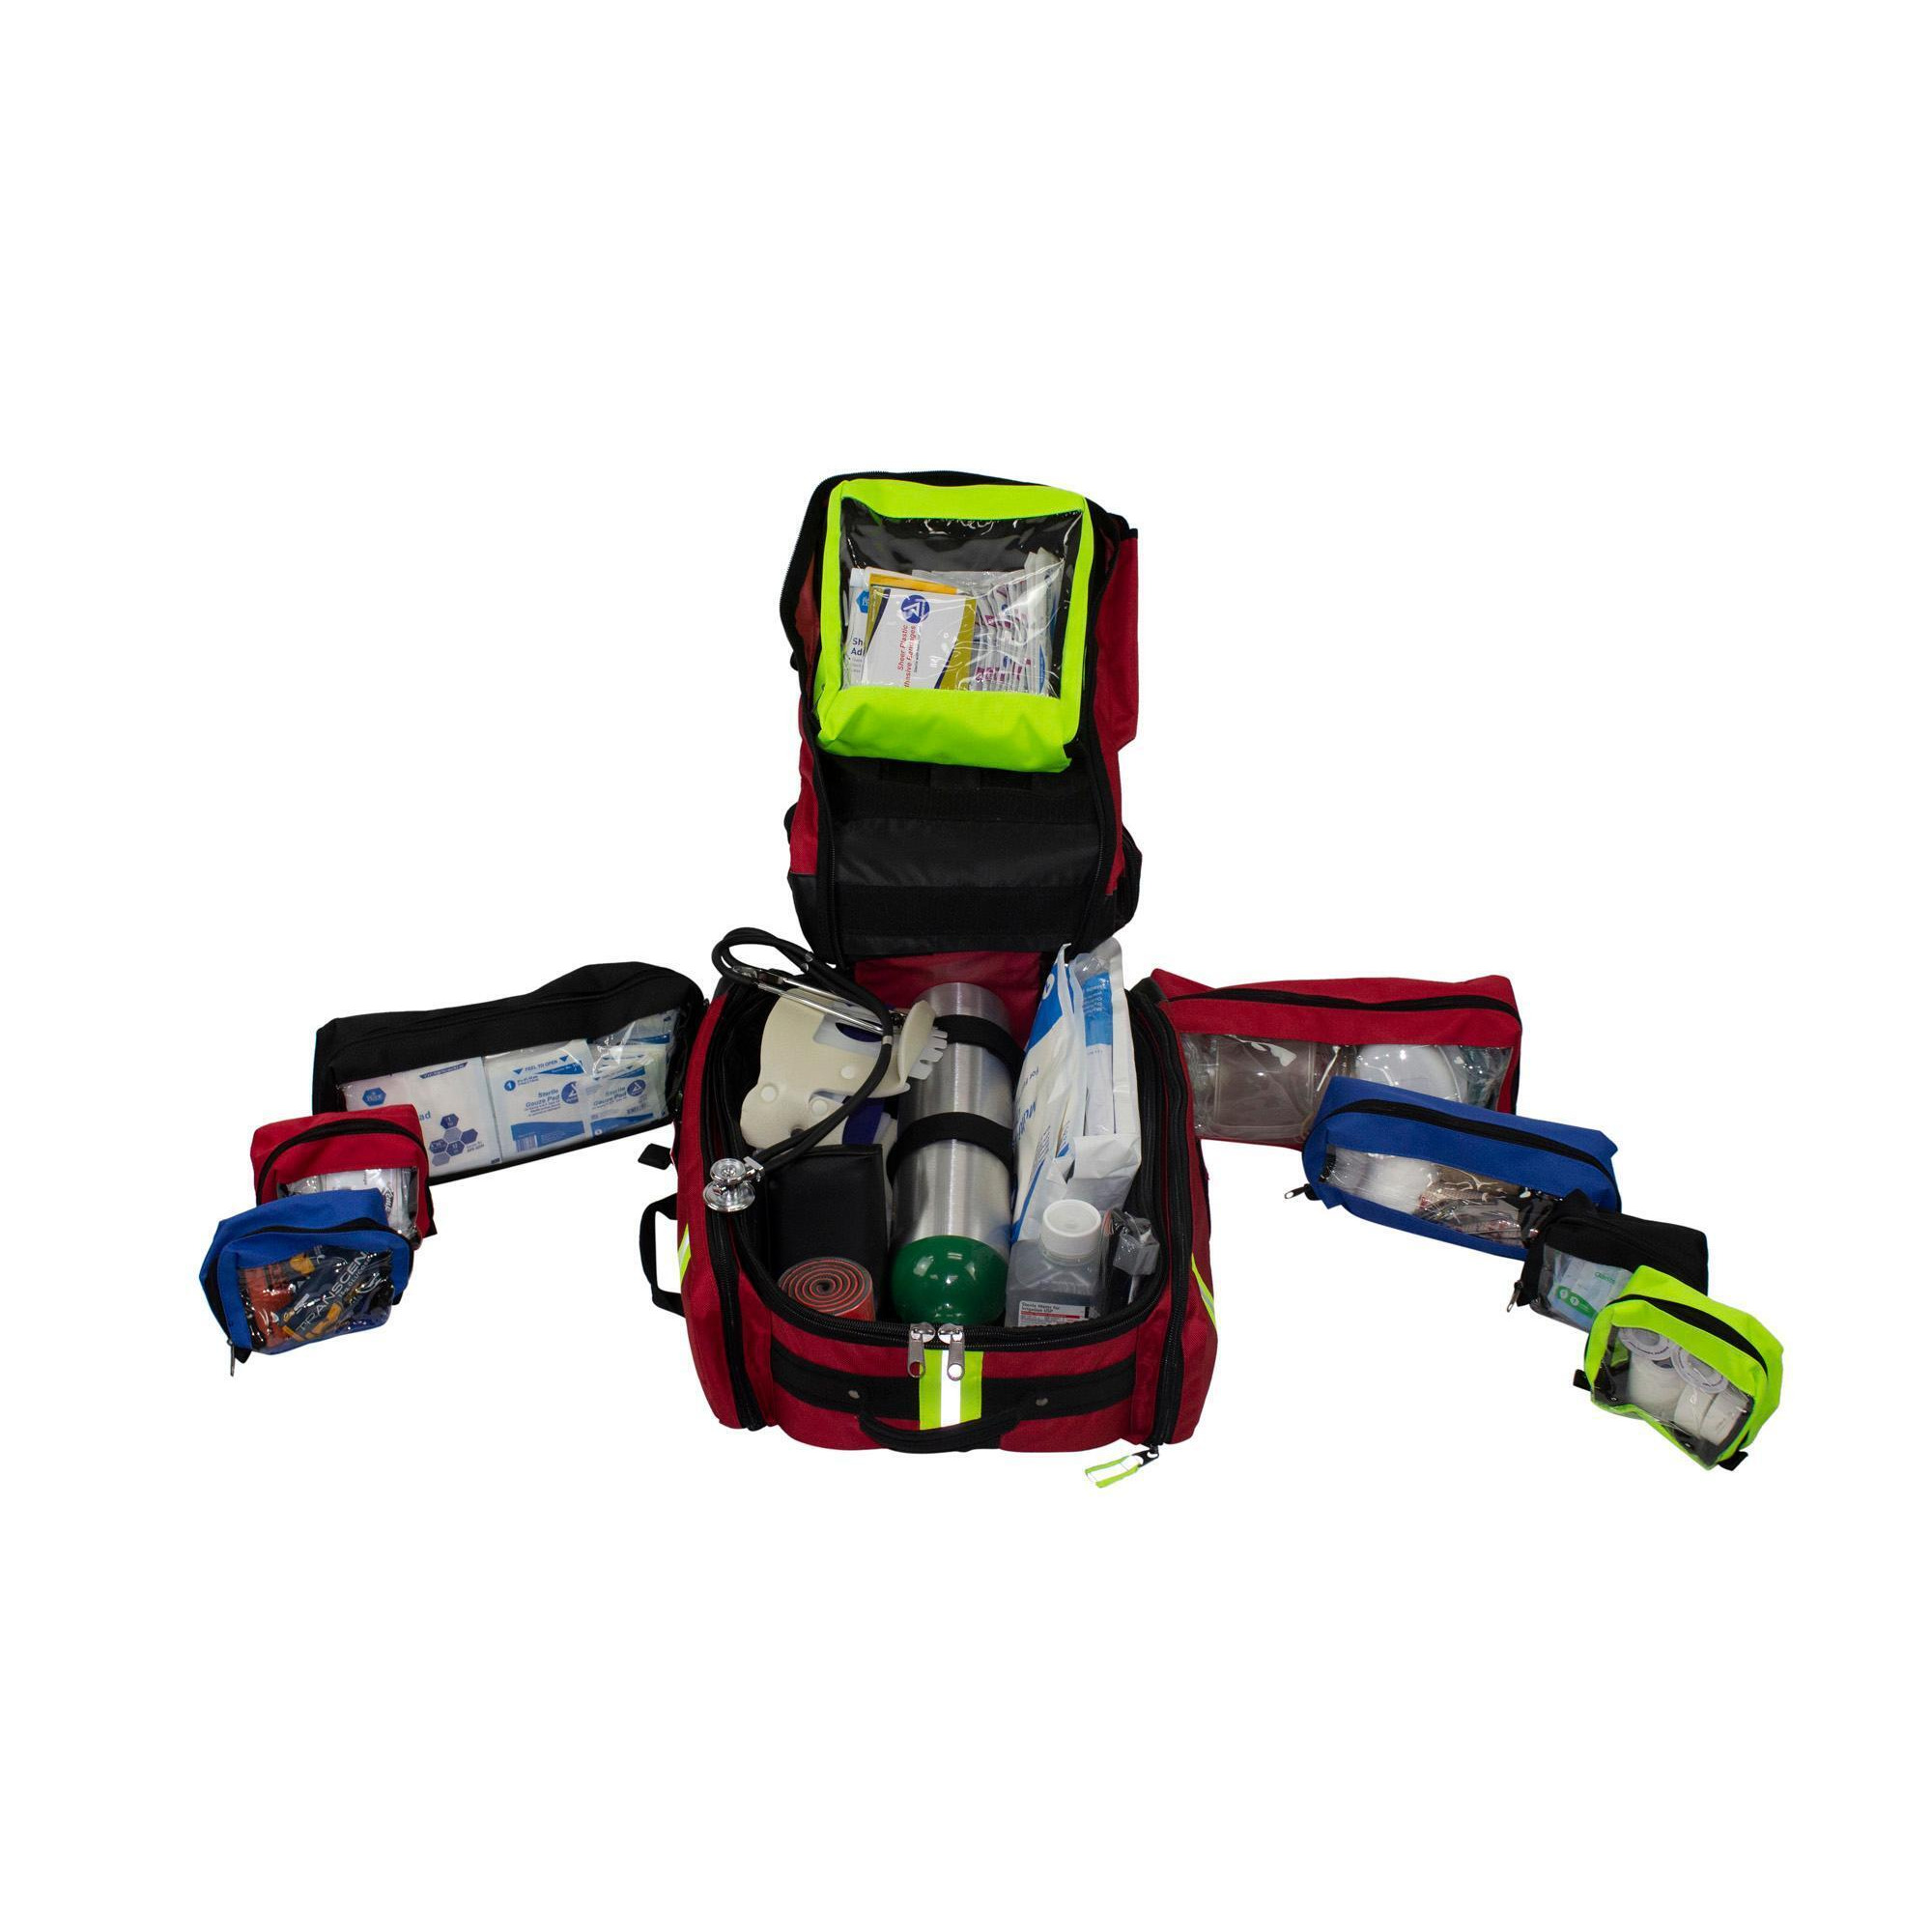 17" Red, Black, and Lime Green Outdoor Emergency Accessories Kemp USA Medical Supply Kit H alternate image